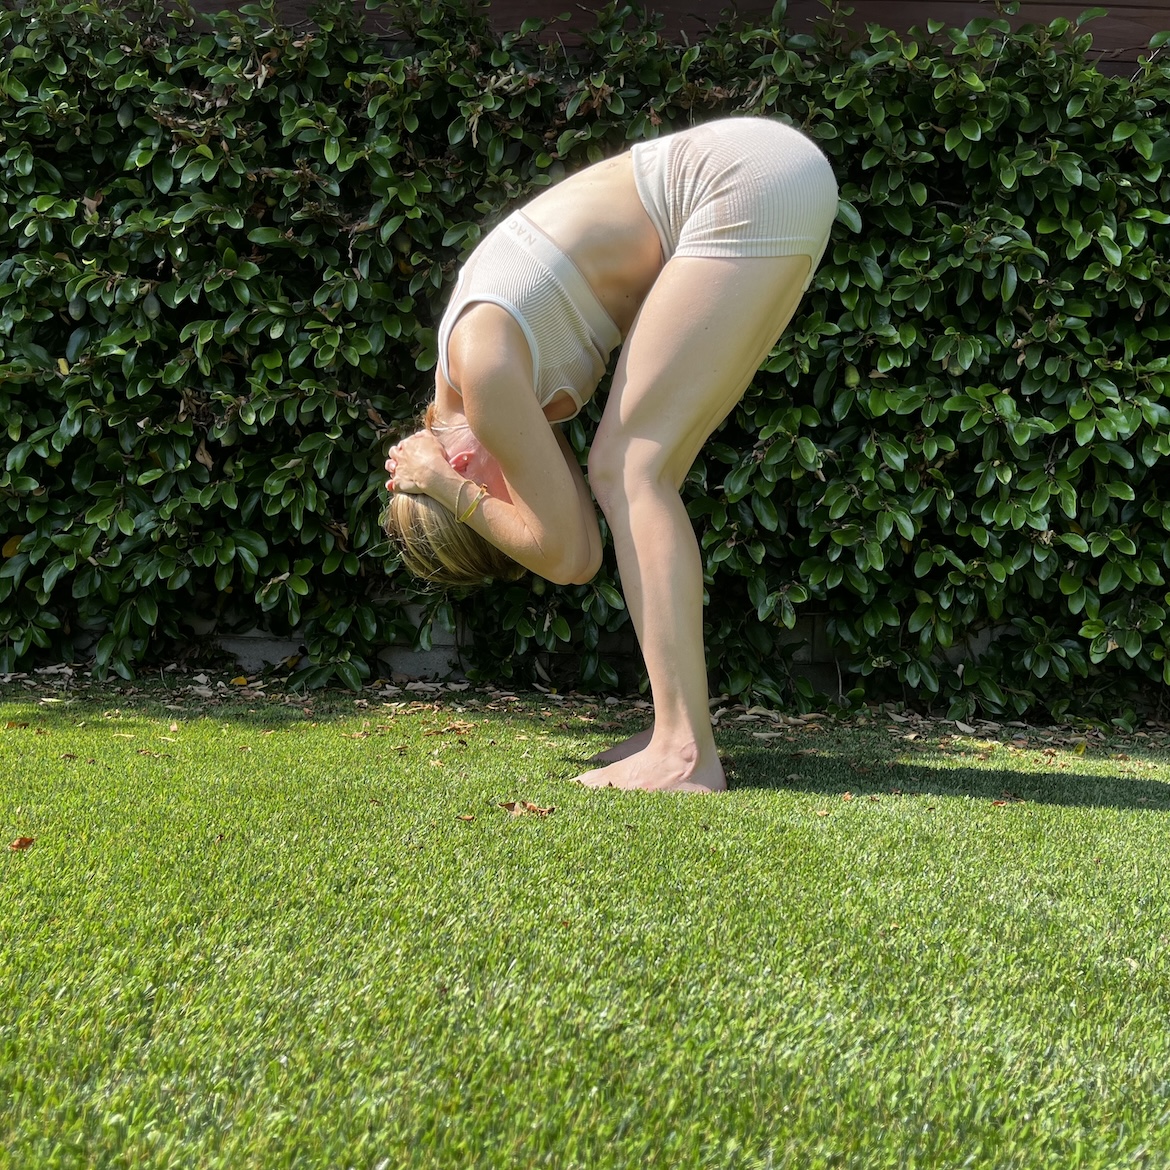 Tight, Achy Neck? Melt Away the Discomfort With These 5 Yoga Poses